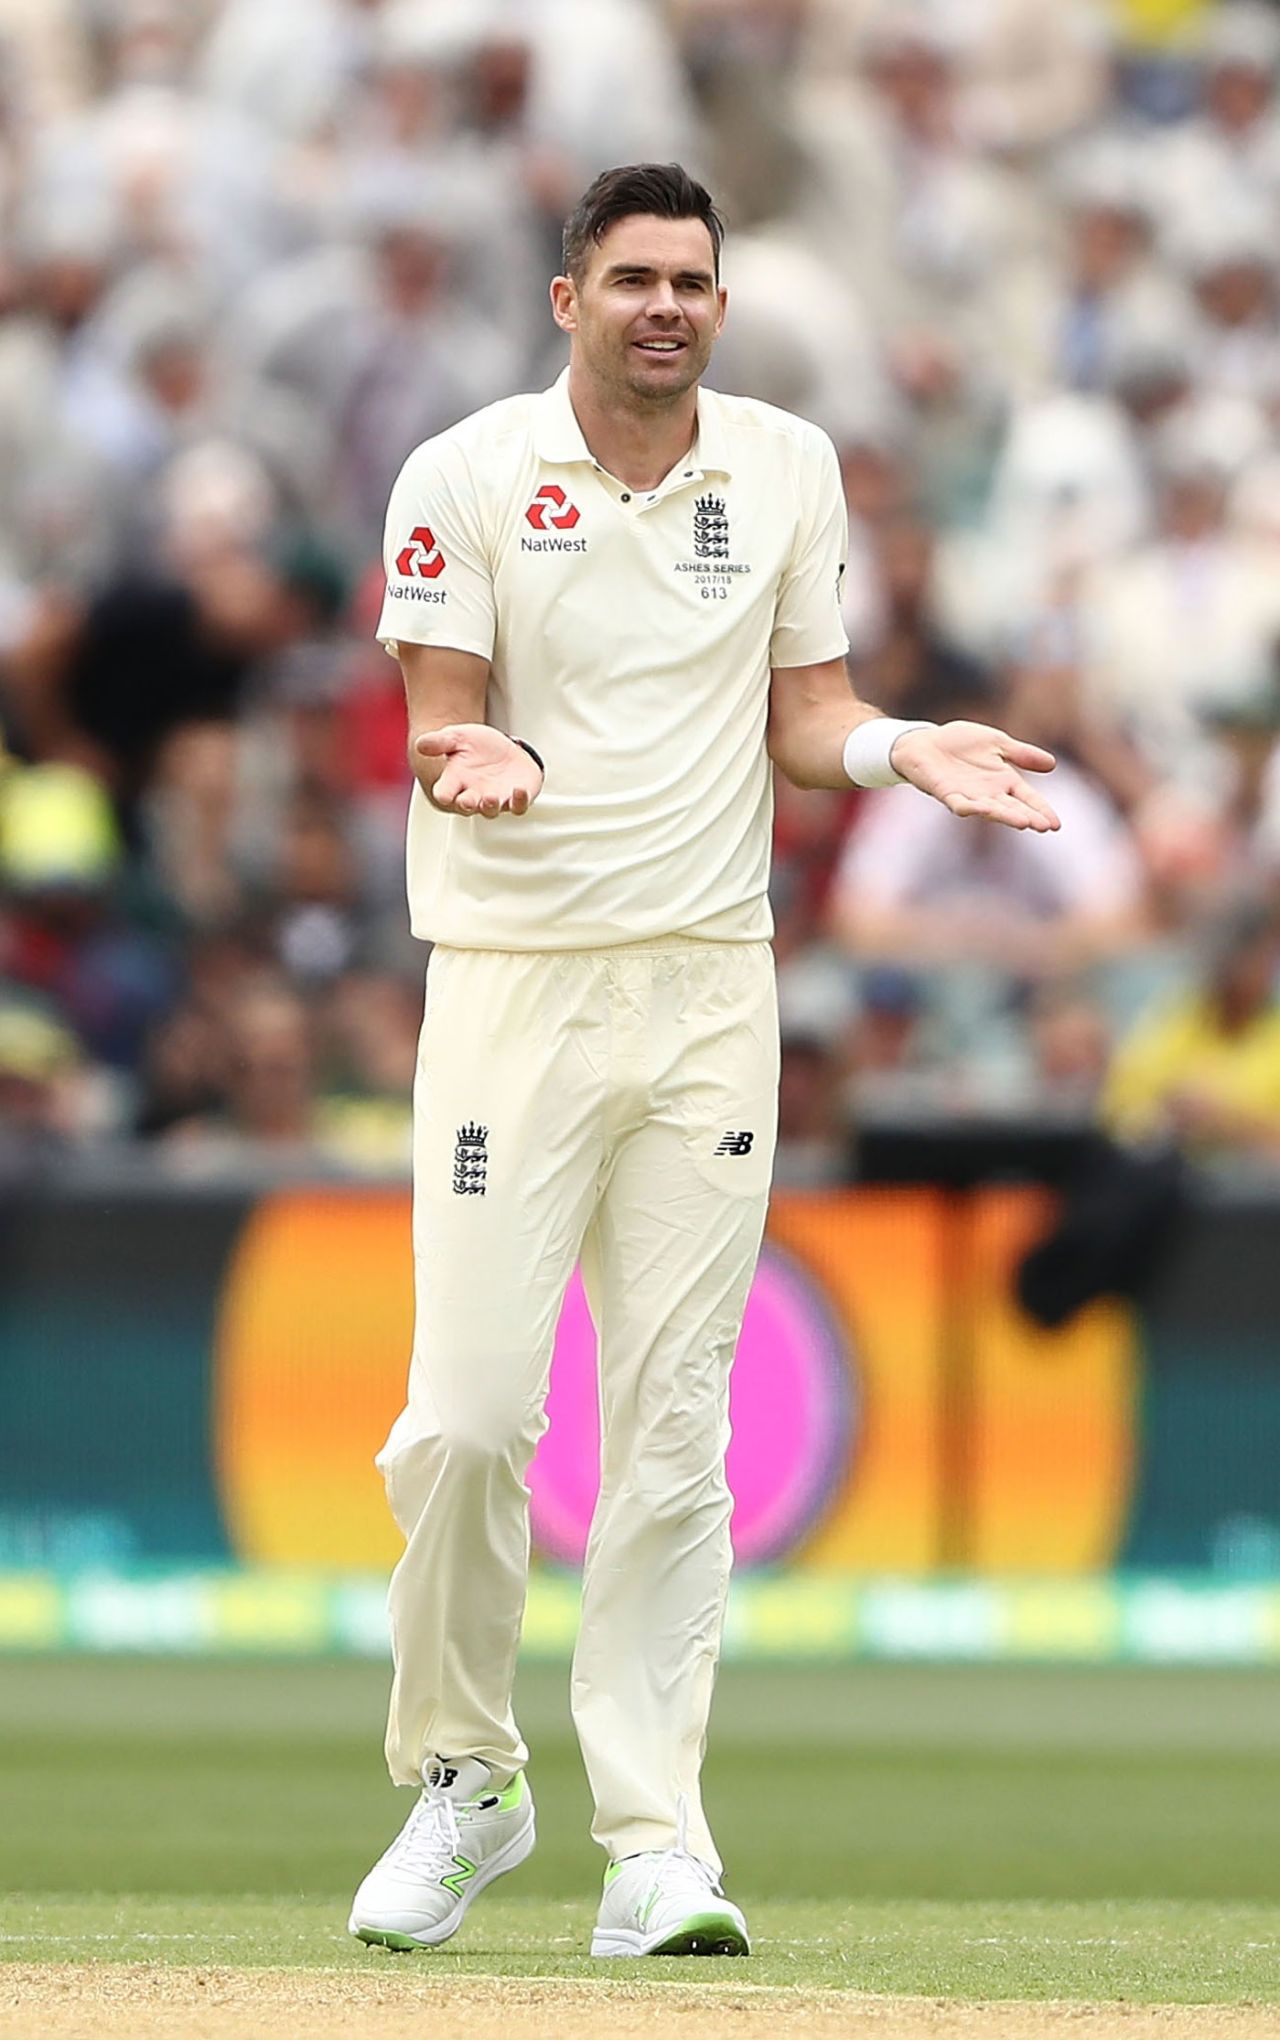 James Anderson twice had lbw decisions overturned, Australia v England, 2nd Test, The Ashes 2017-18, 2nd day, Adelaide, December 3, 2017